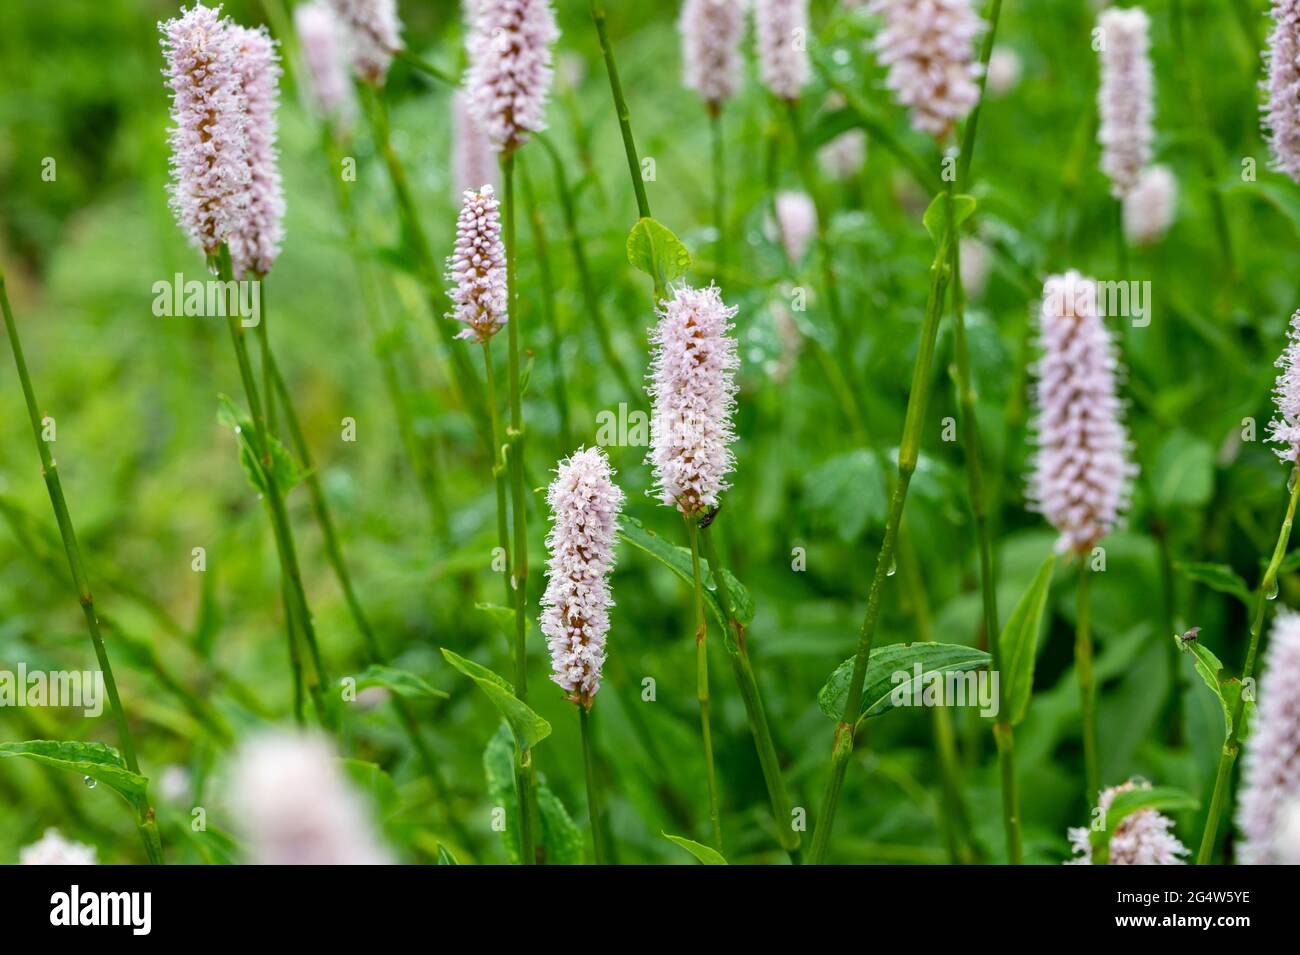 Botanical collection, young green leaves and pink flowers of medicinal plants Bistorta officinalis or Persicaria bistorta), known as bistort, snakeroo Stock Photo